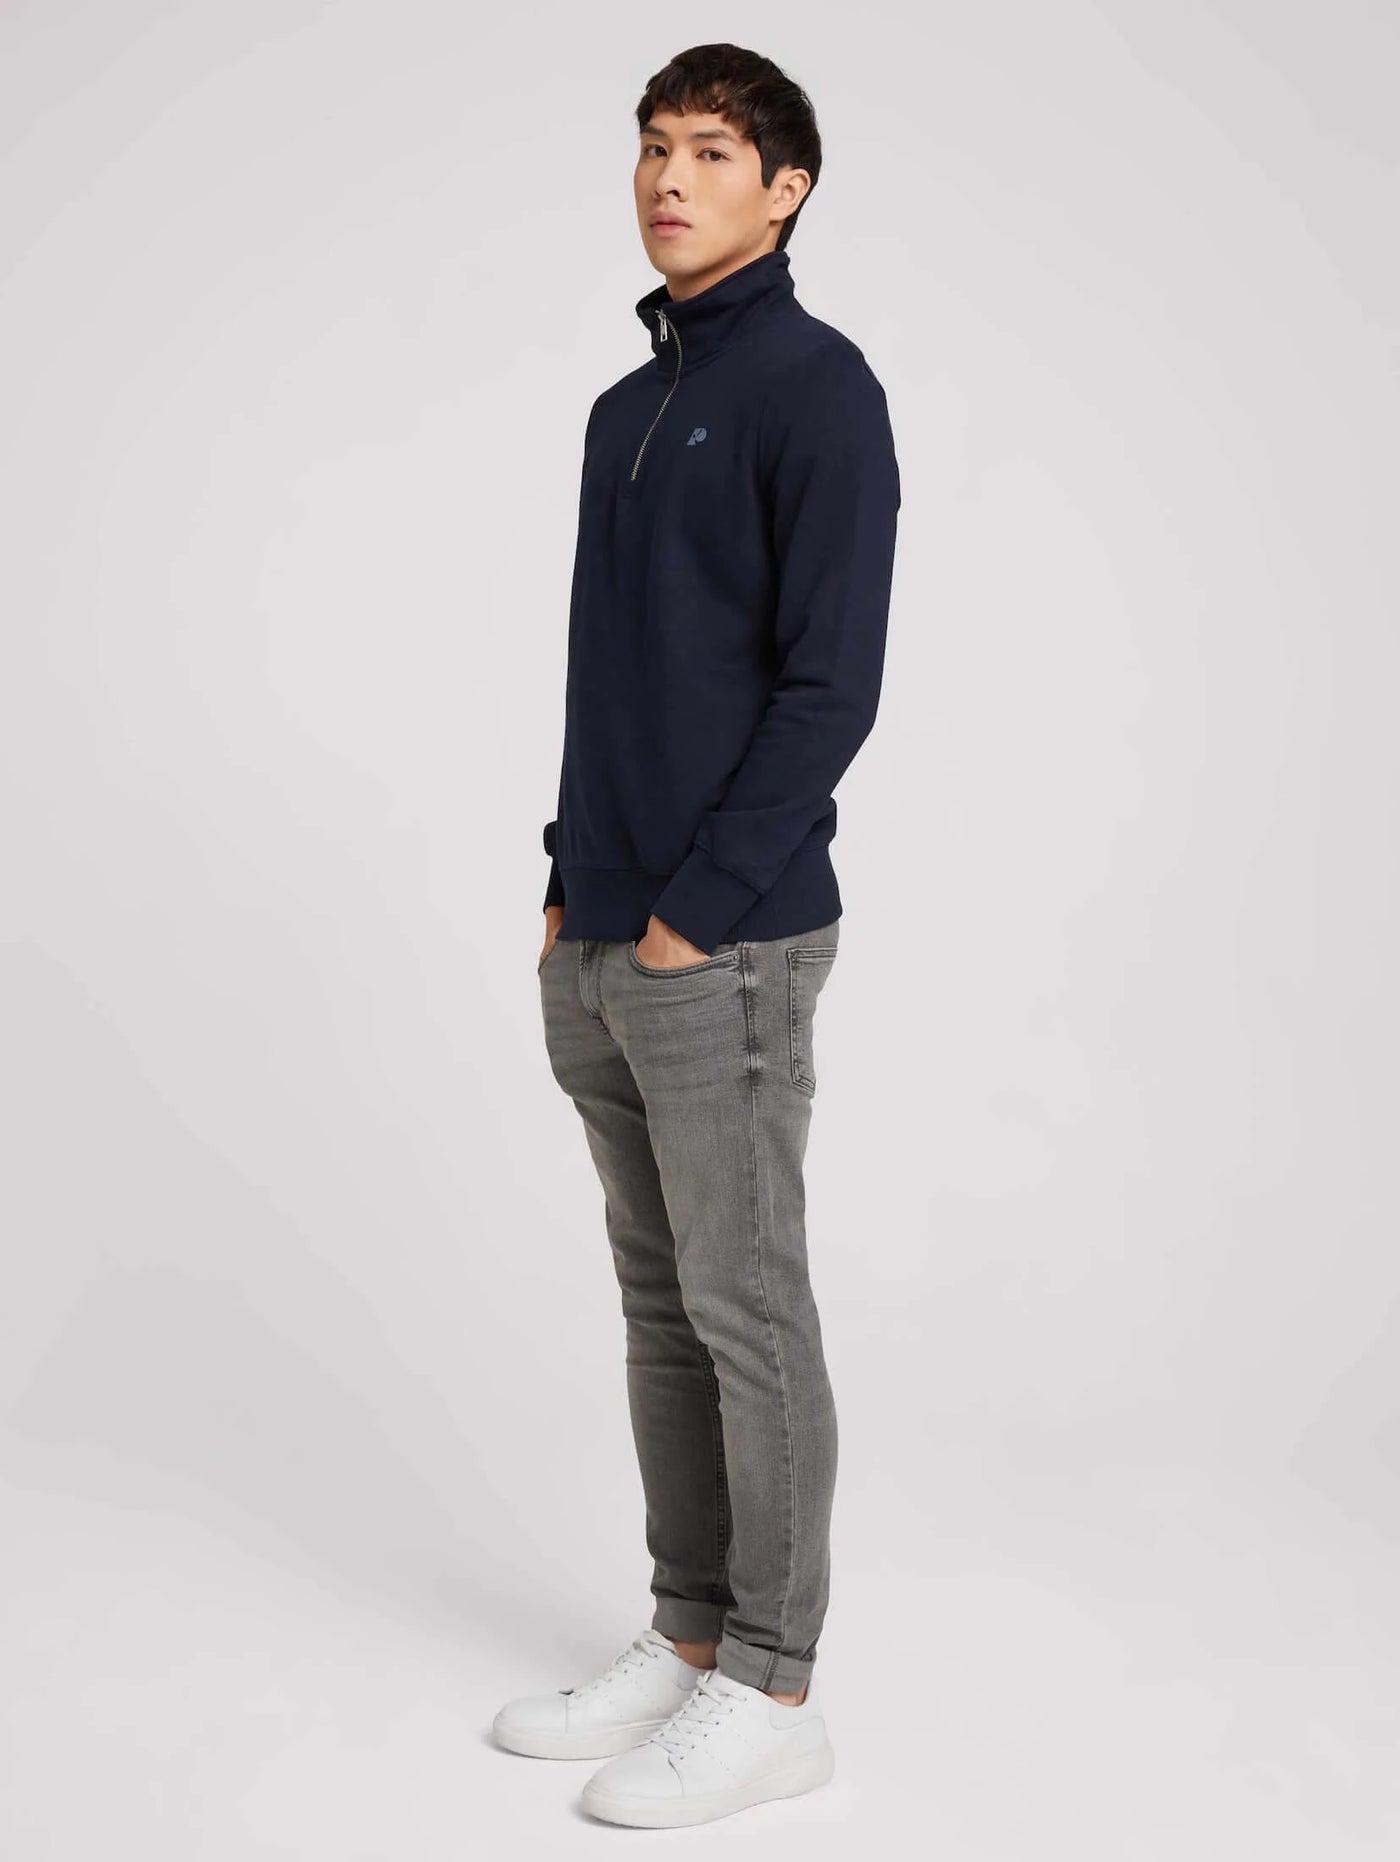 MBRC@TOMTAILOR - MEN STAND-UP SWEATER - FULL-BODY VIEW